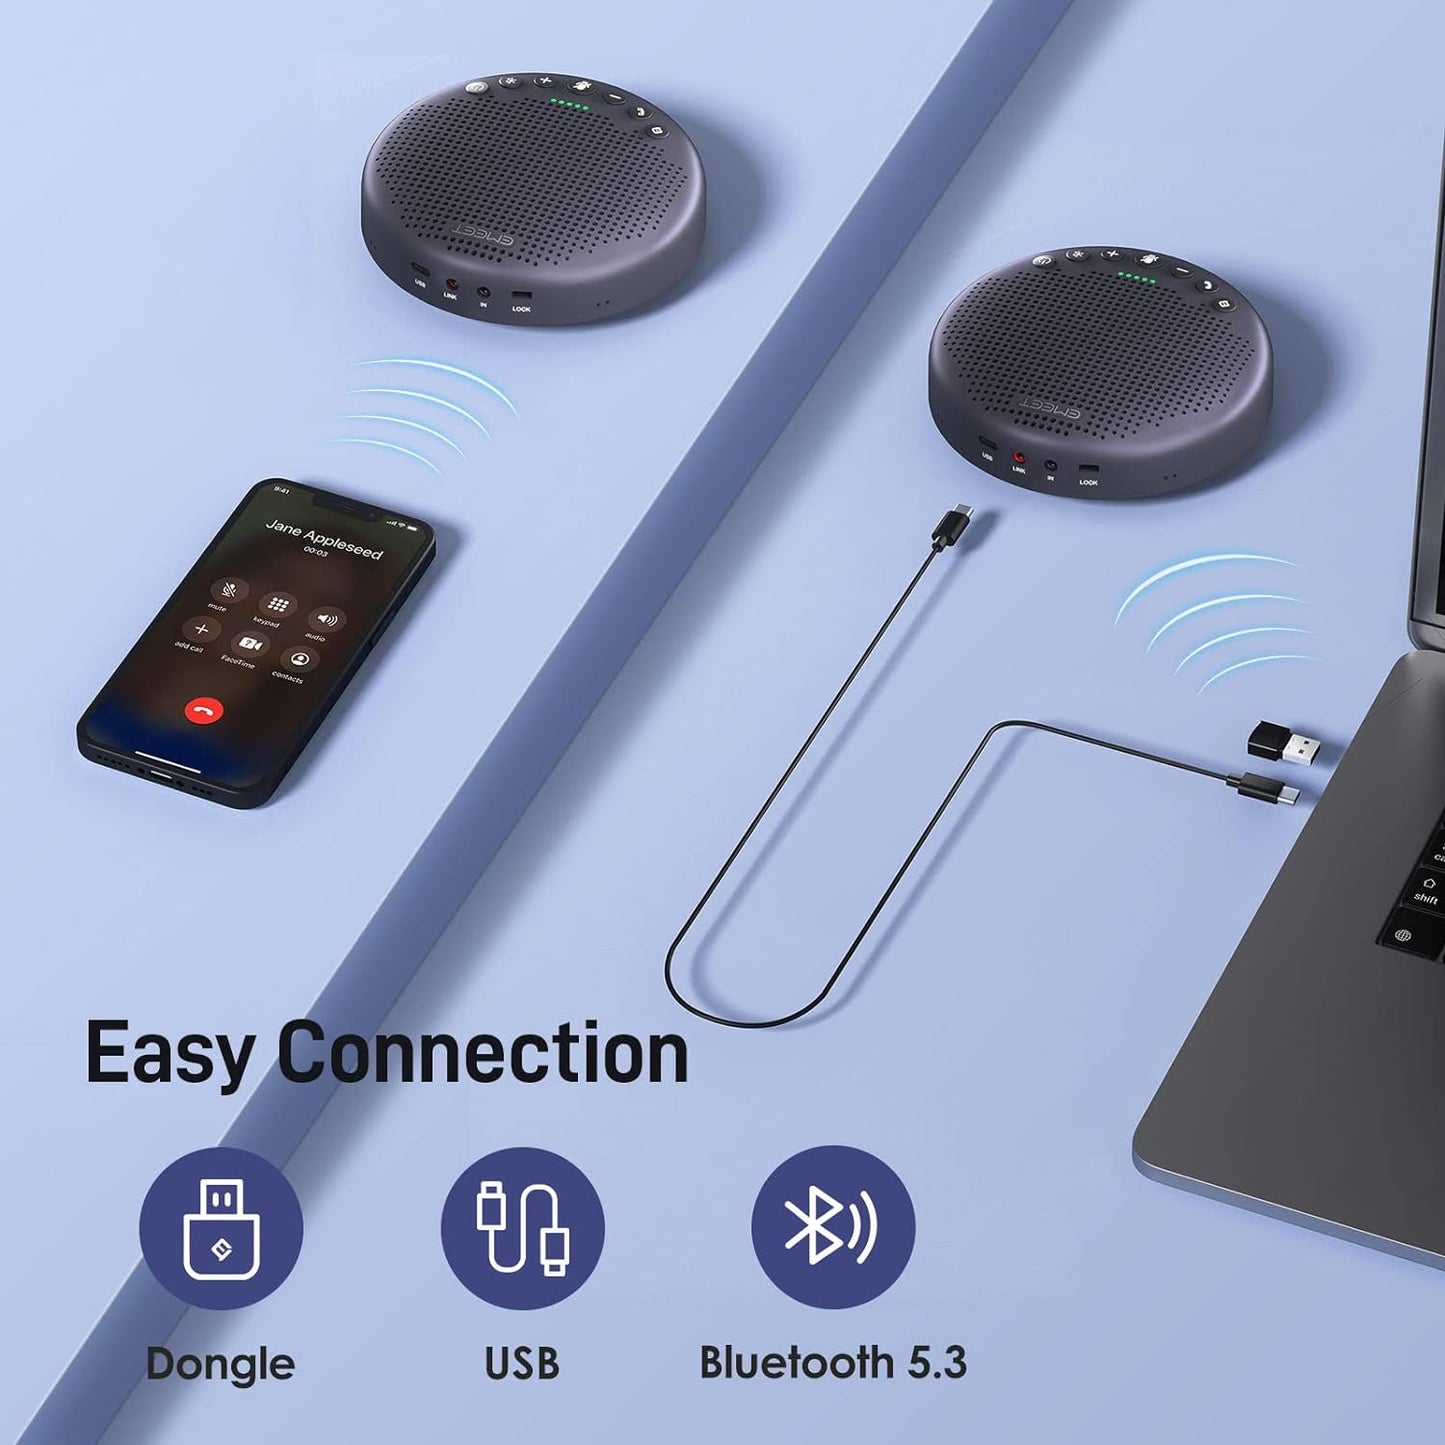 EMEET Conference Speaker and Microphone Luna Plus Kit, 8+1 Mics, 360Voice Pickup, Noise Reduction, USB C/Bluetooth 5.3, Bluetooth Speakerphone for 14 People w/Daisy Chain for 25, Broad Compatibility (Luna Plus Kit w/ 9 Mics for 14)